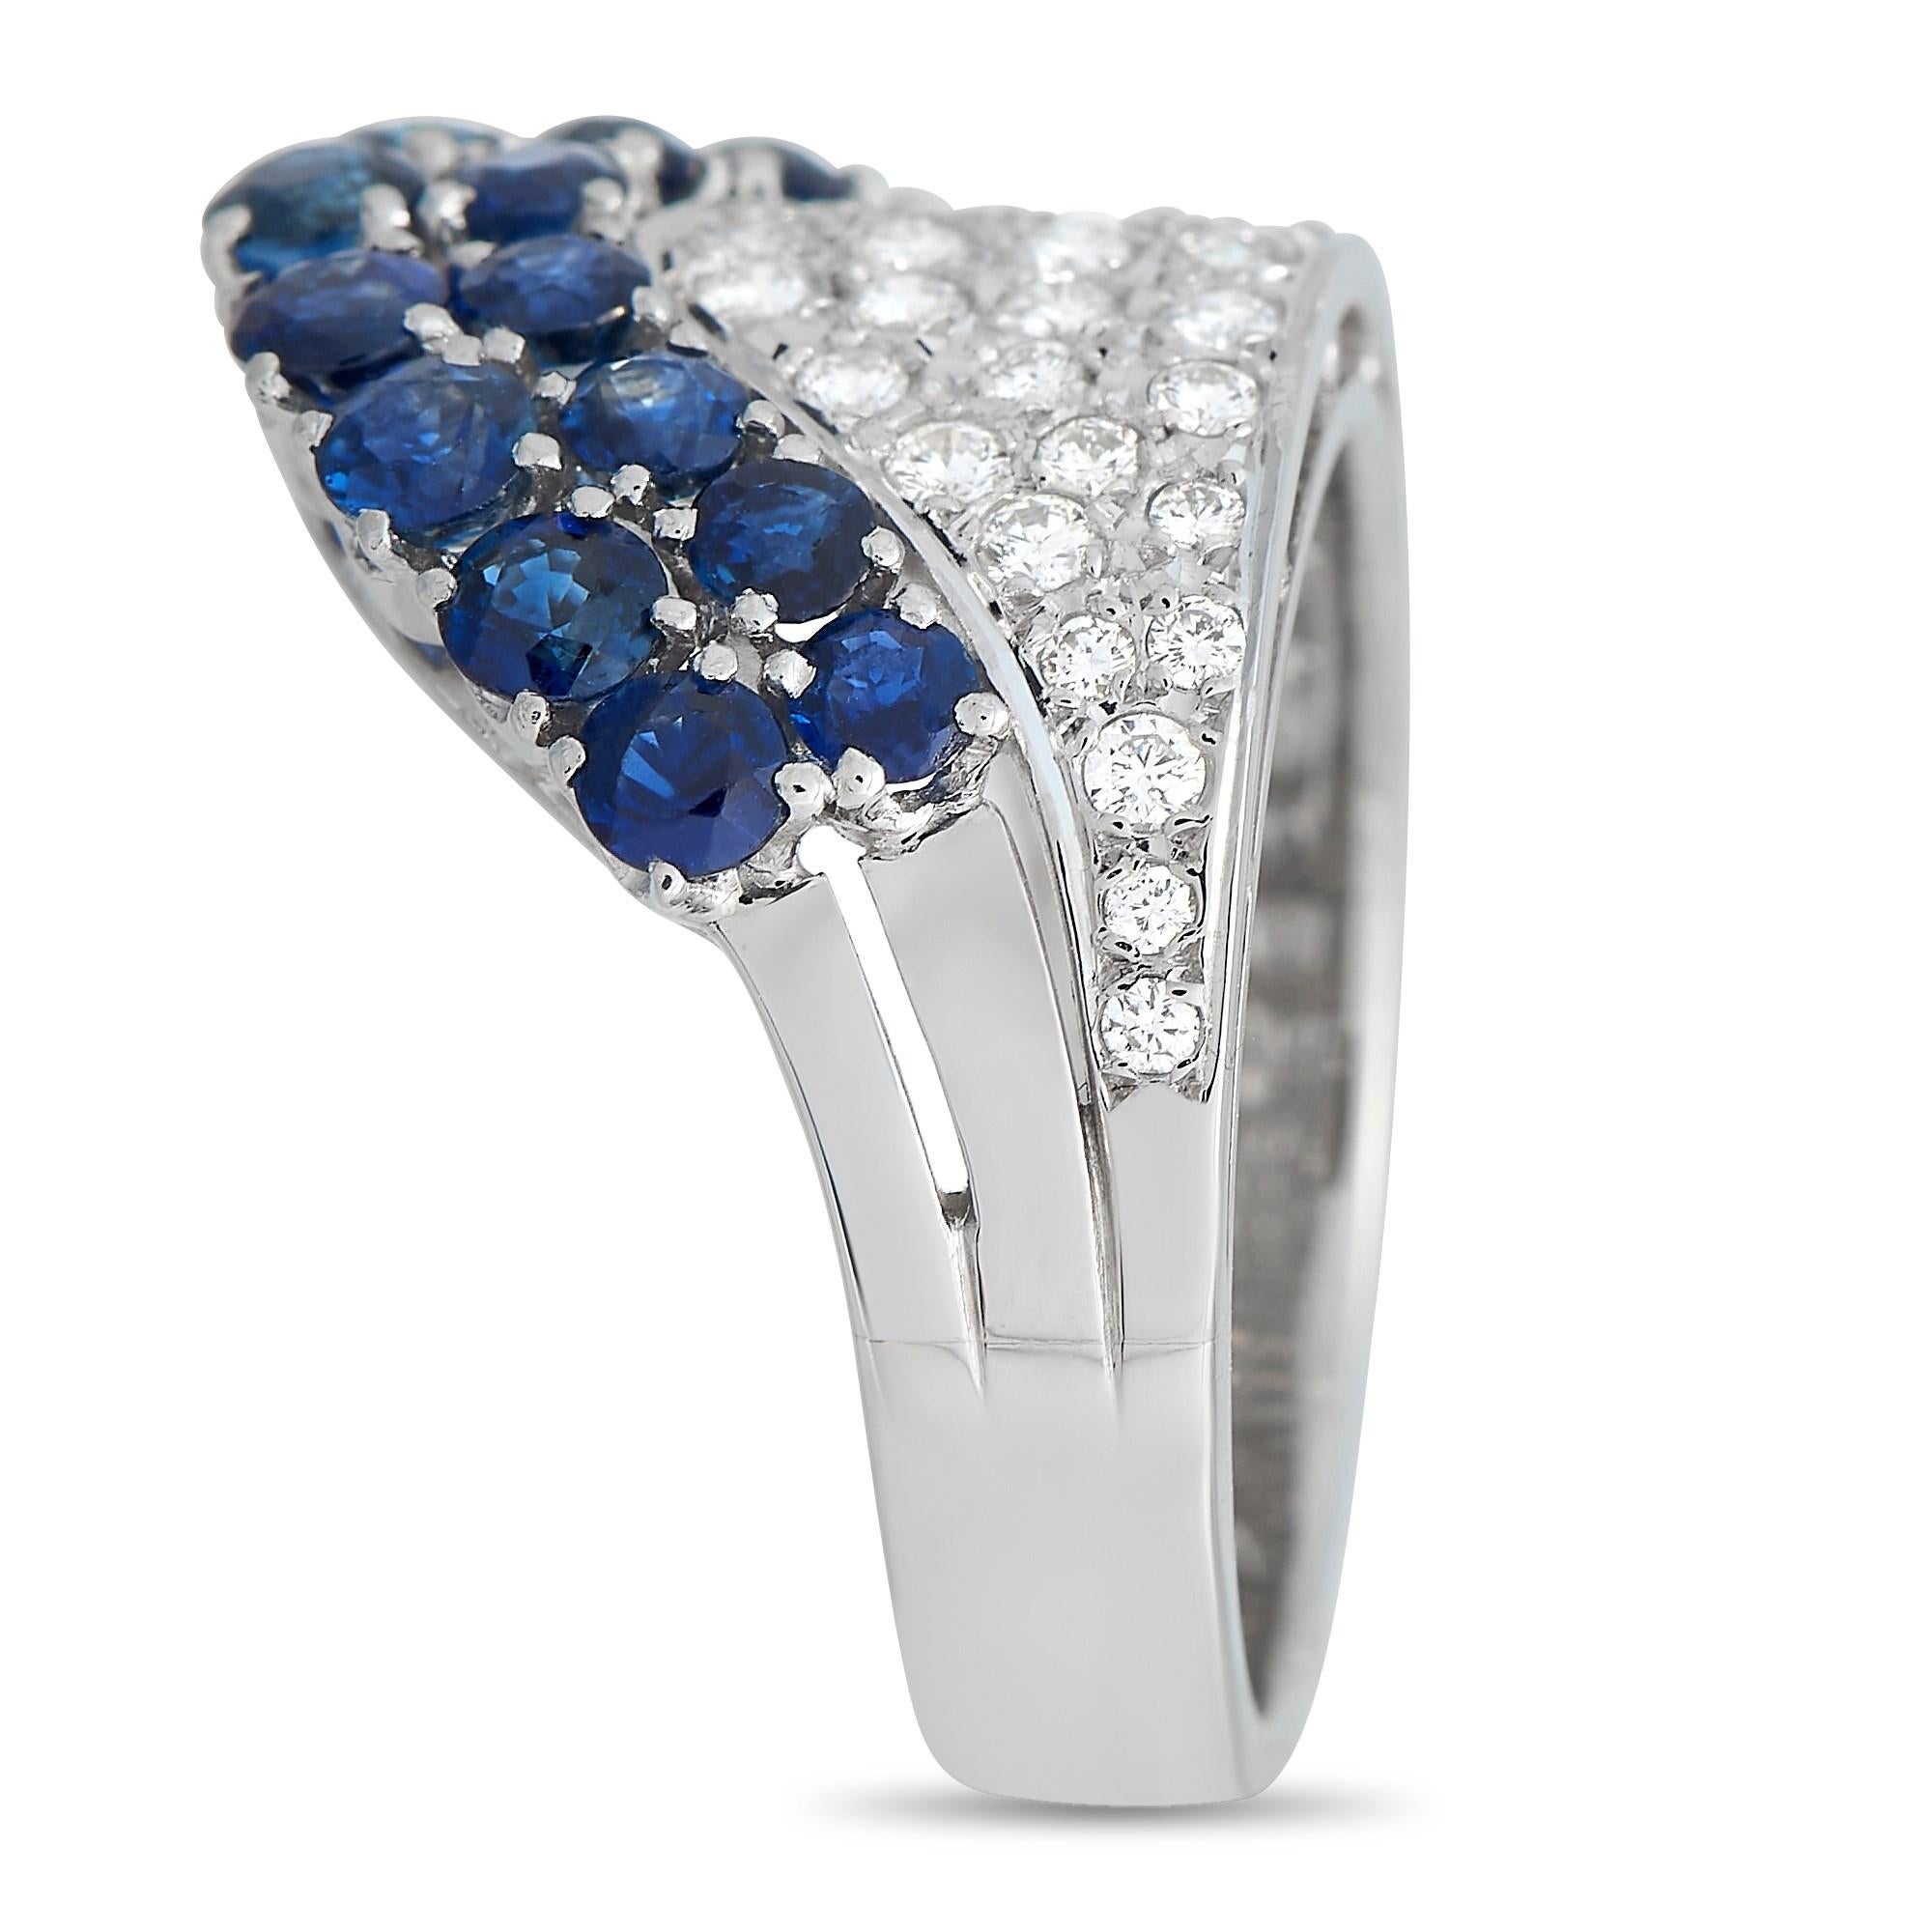 This breathtaking Mikimoto ring features an incredible array of gemstones accenting the Platinum setting. Sparkling inset diamonds totaling 0.50 carats contrast beautifully against the stunning round-cut sapphires, which together possess a total